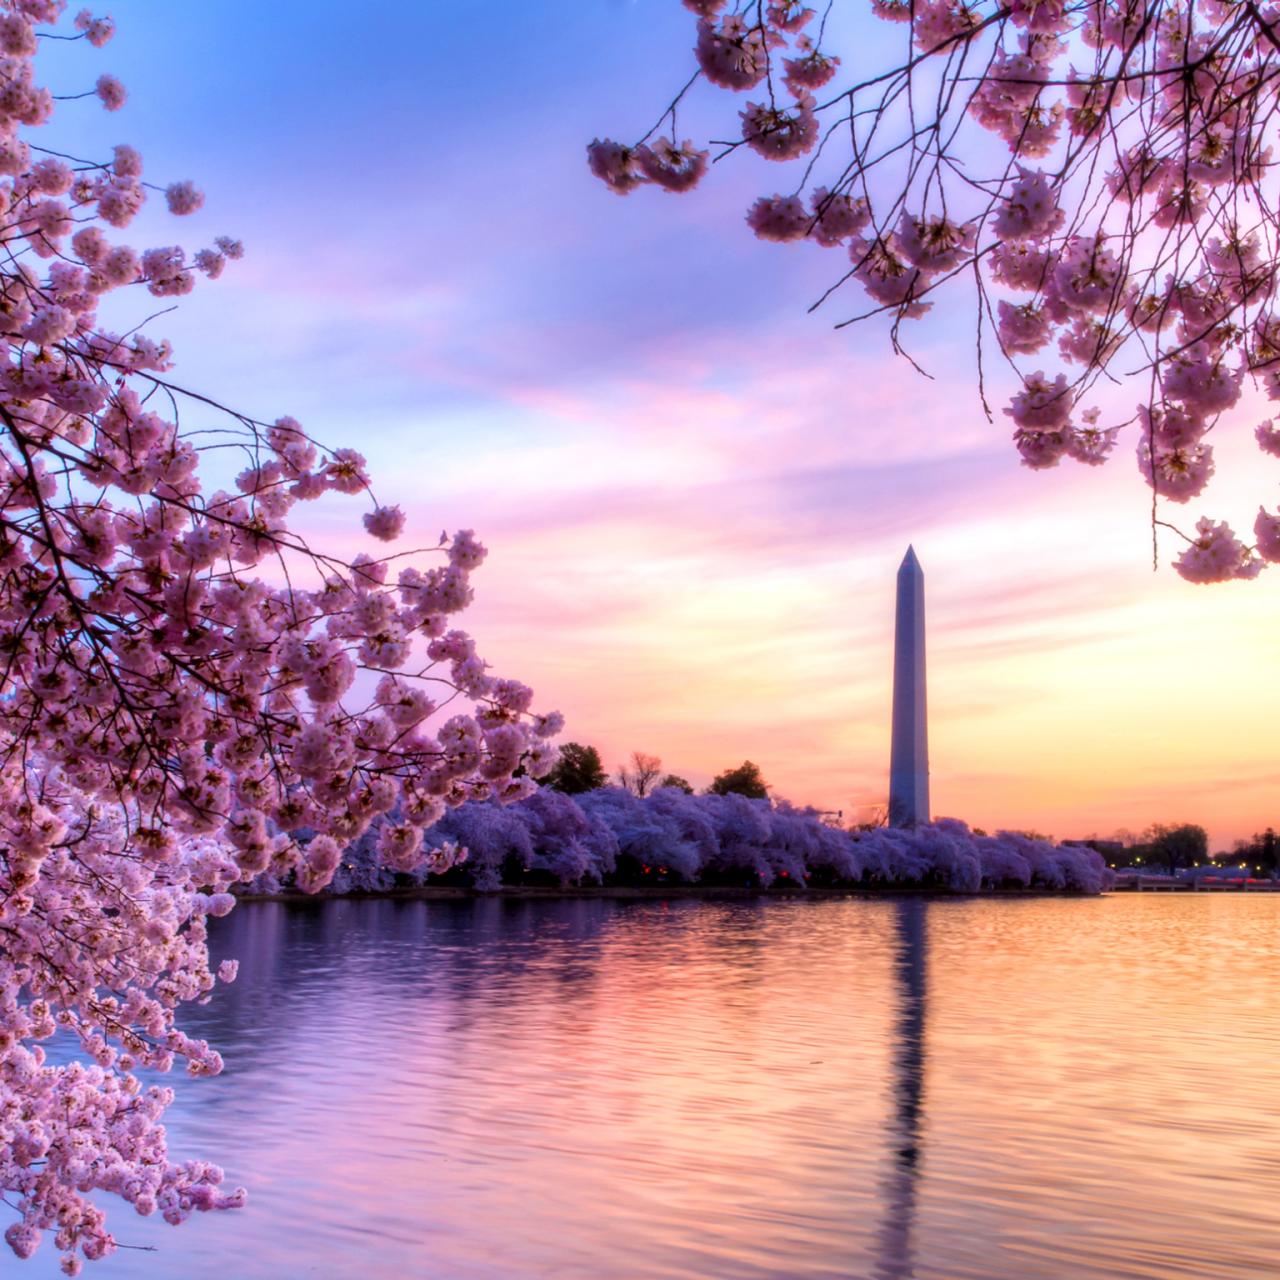 Wizards to Celebrate Cherry Blossom Night on March 24